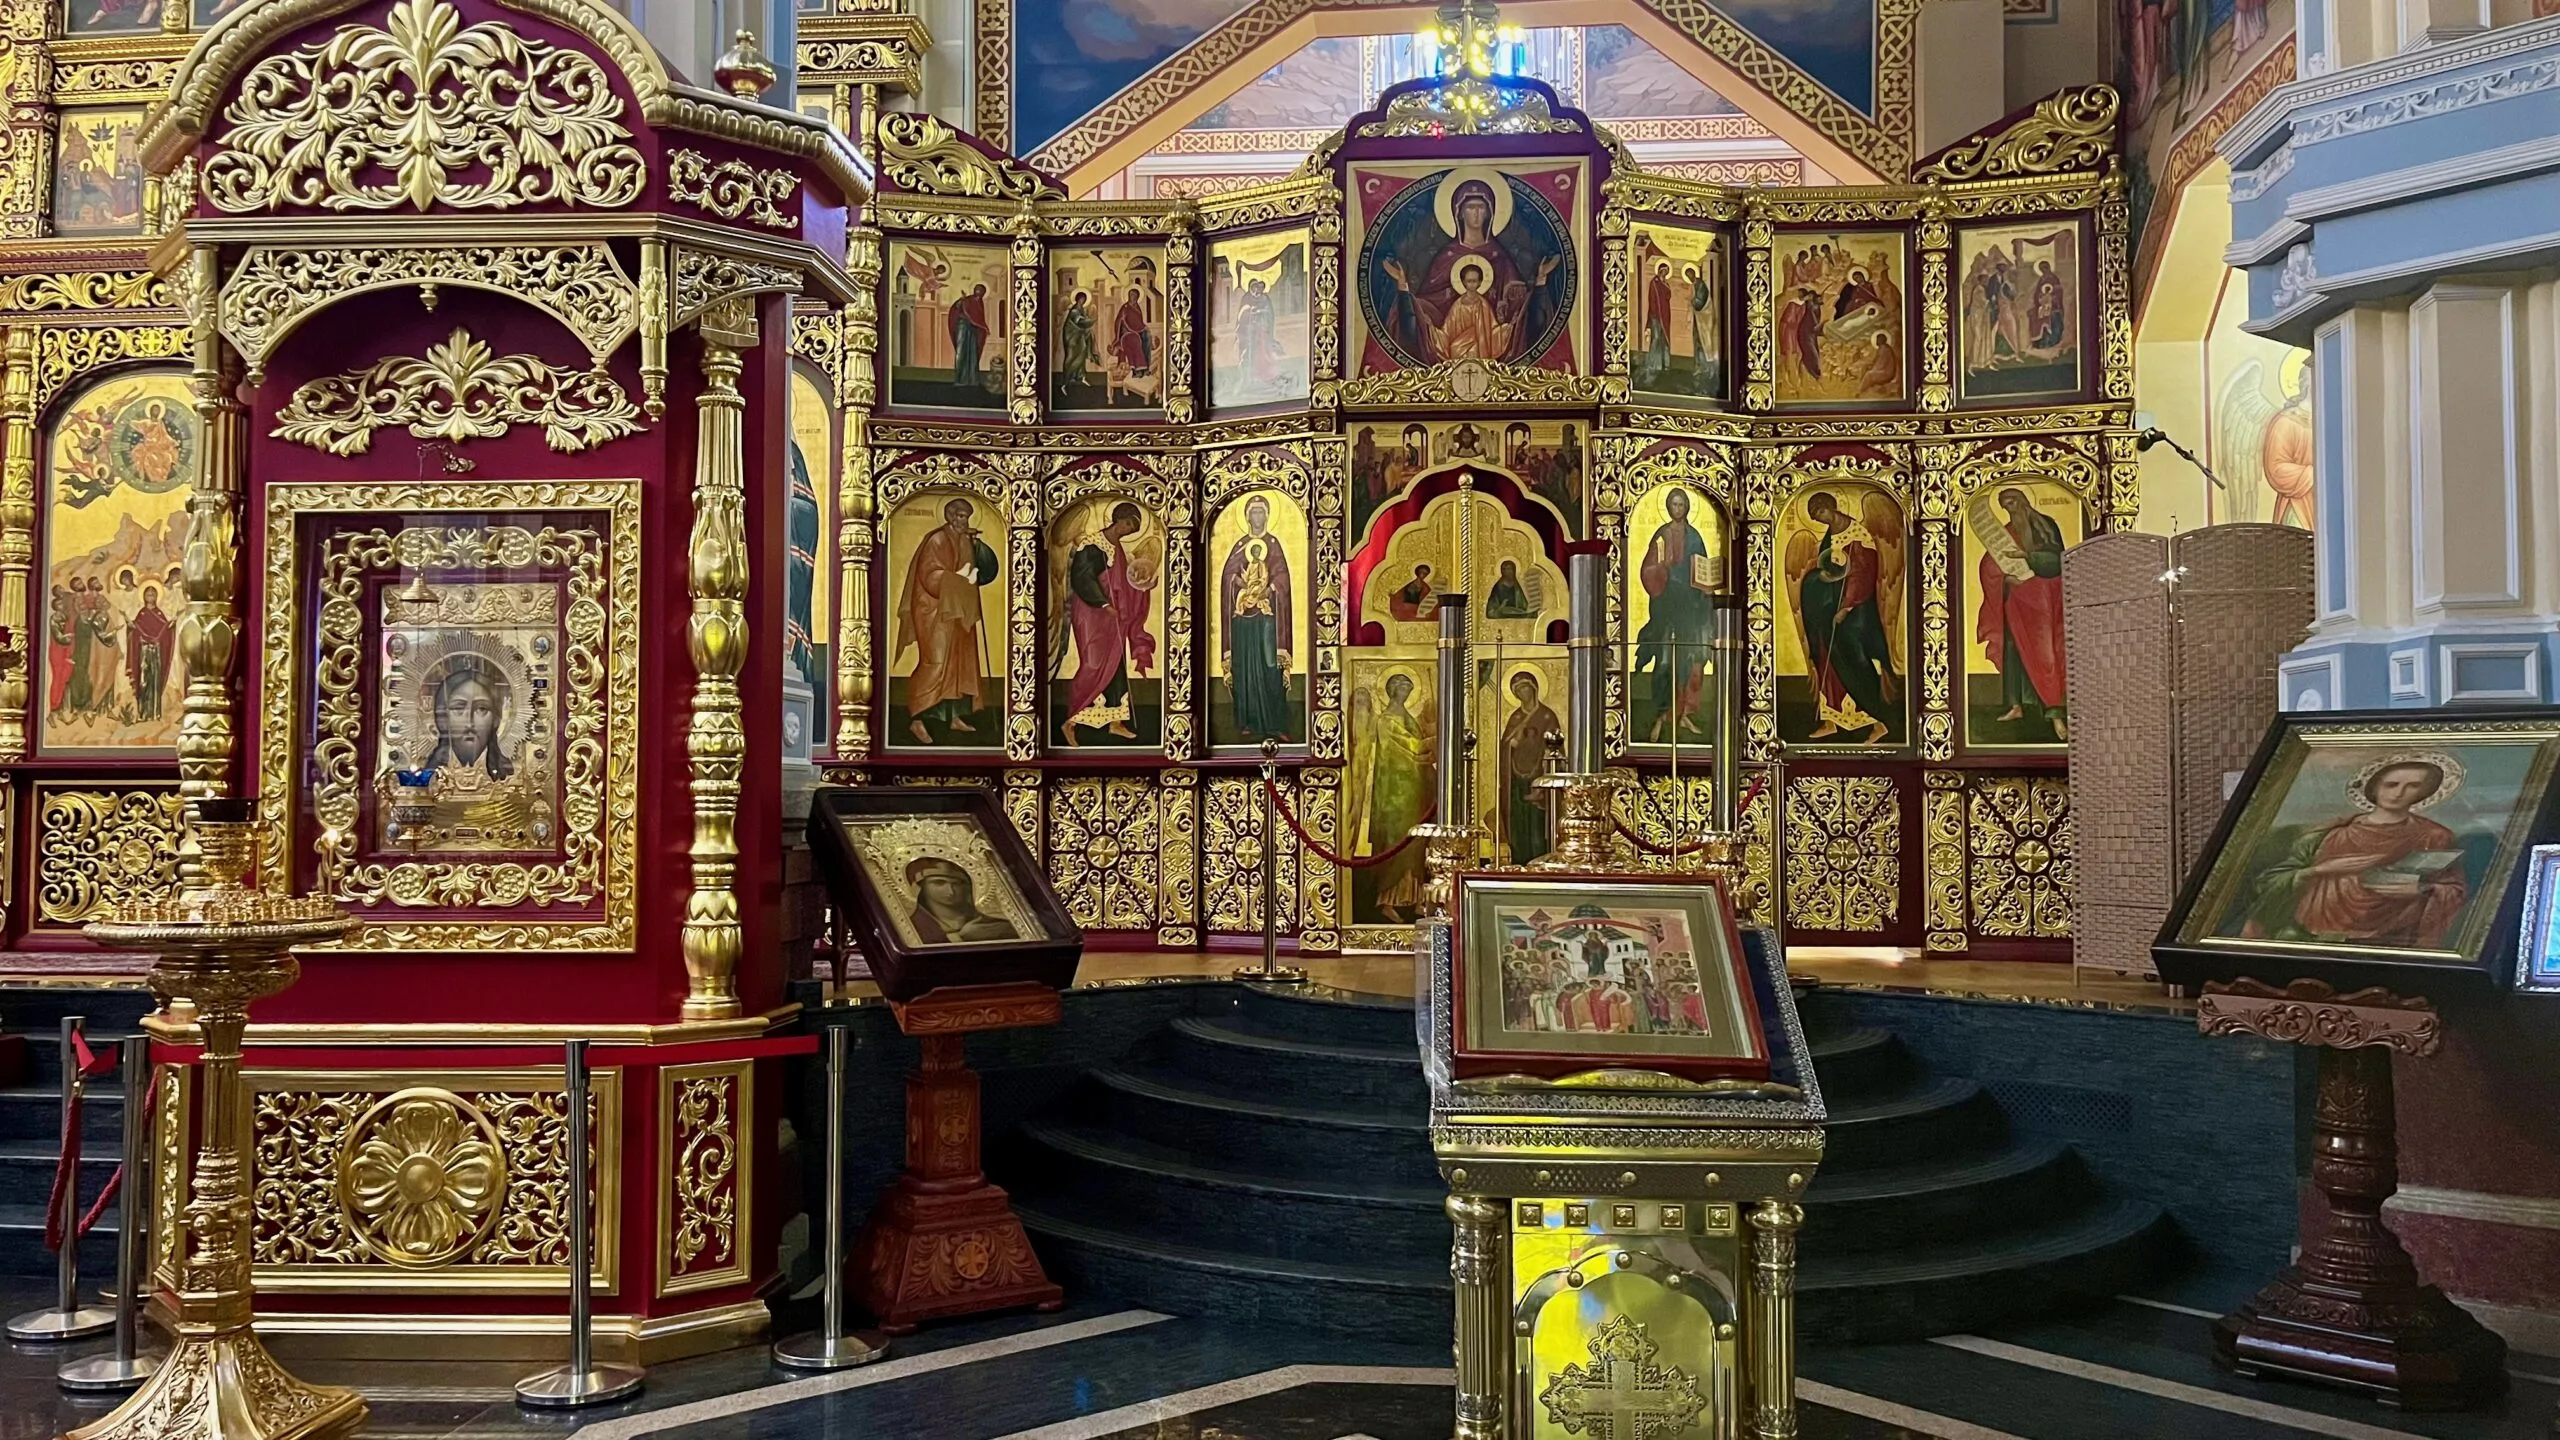 the interior of zenkov cathedral is full of iconography in deep colors with gilded framework